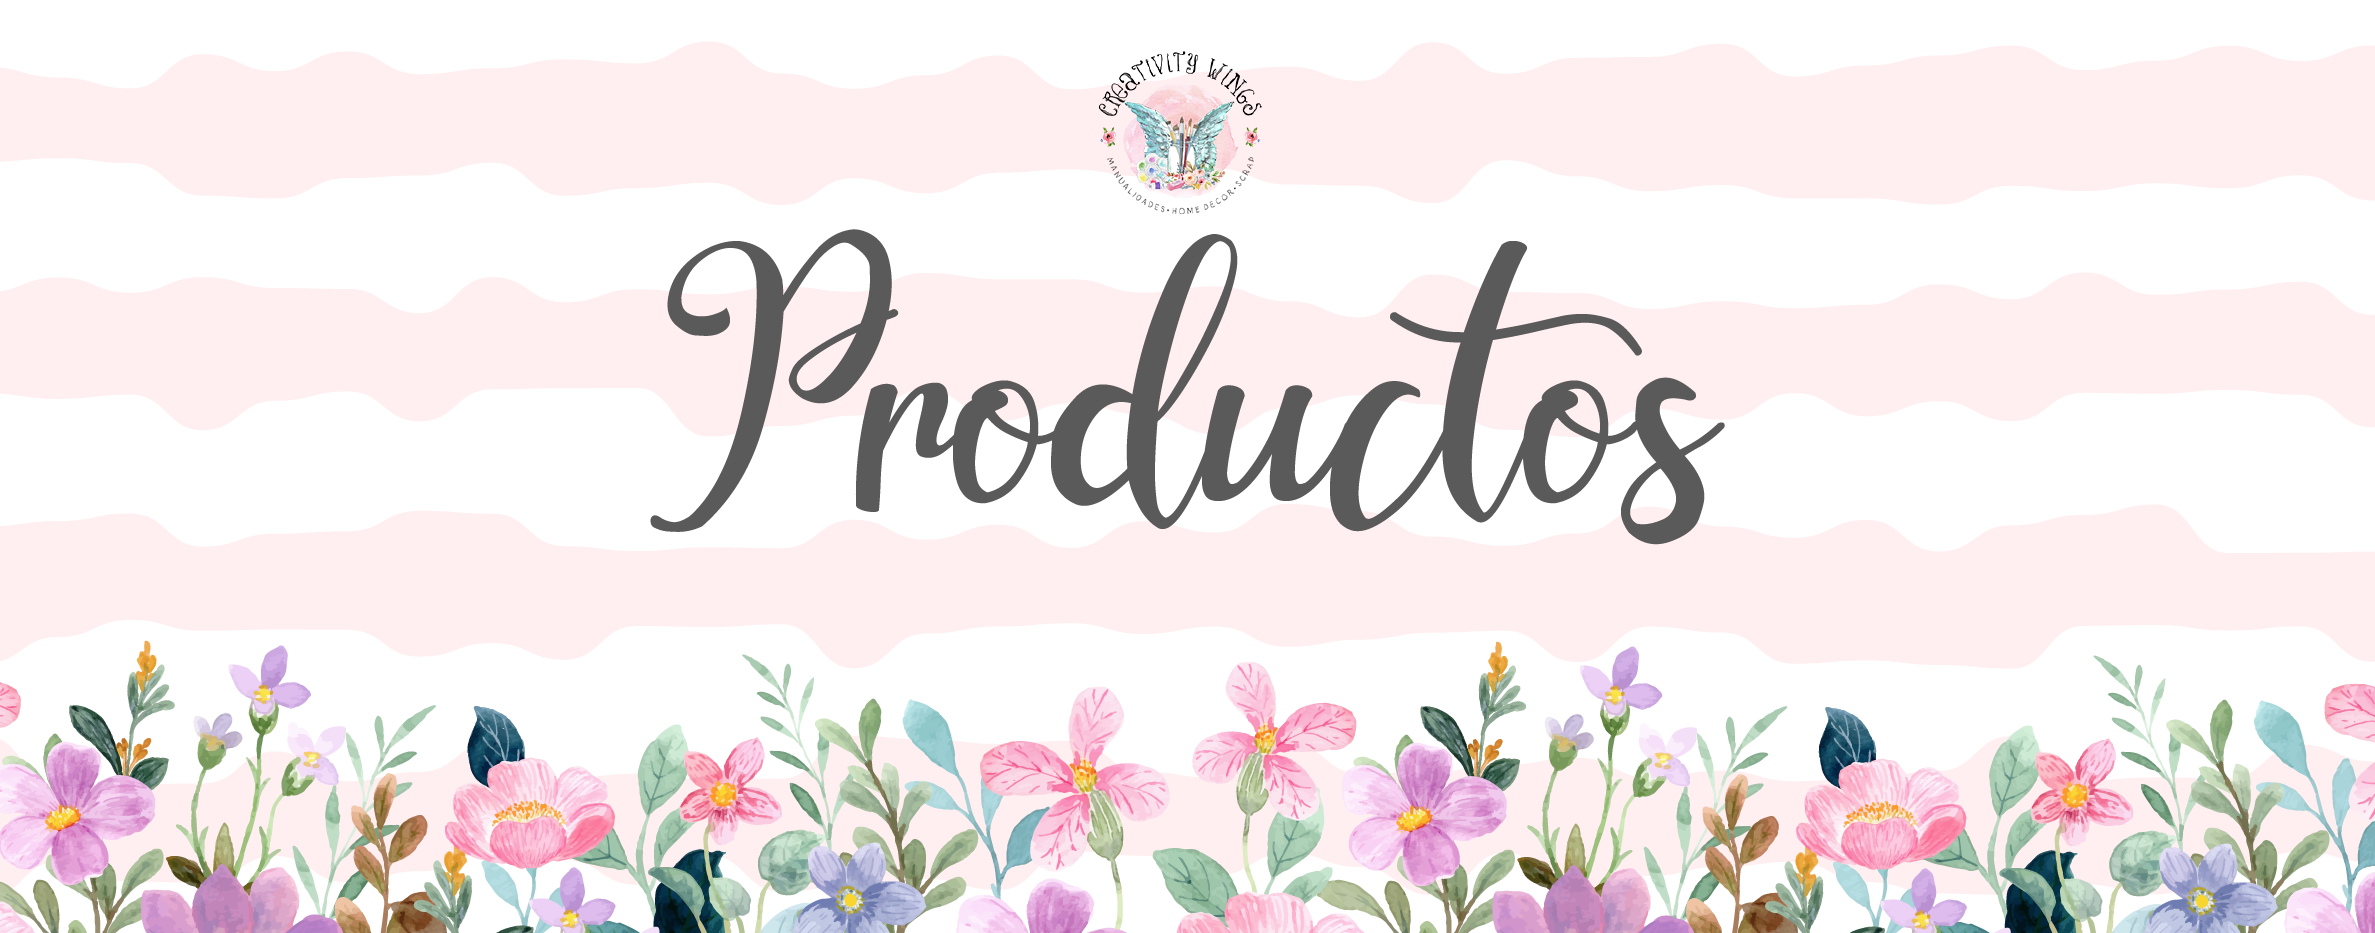 creativitywings-productos